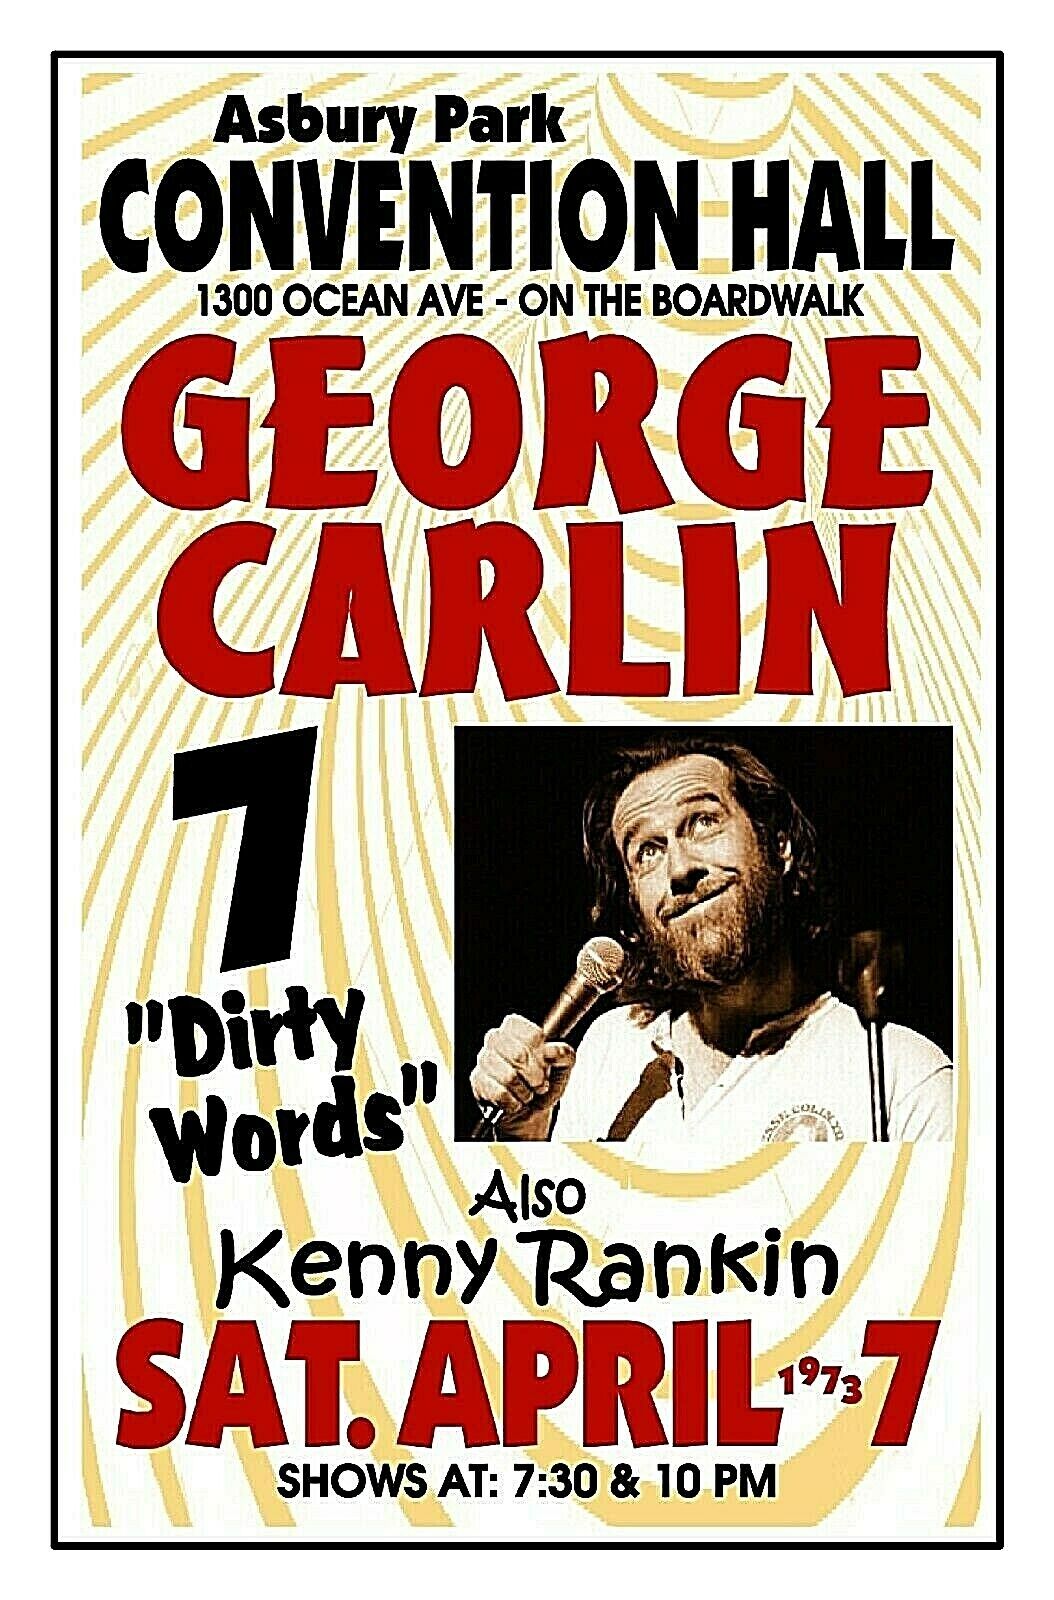 CONCERT POSTER George Carlin 1973 ASBURY PARK NJ Convention Hall Gig Poster